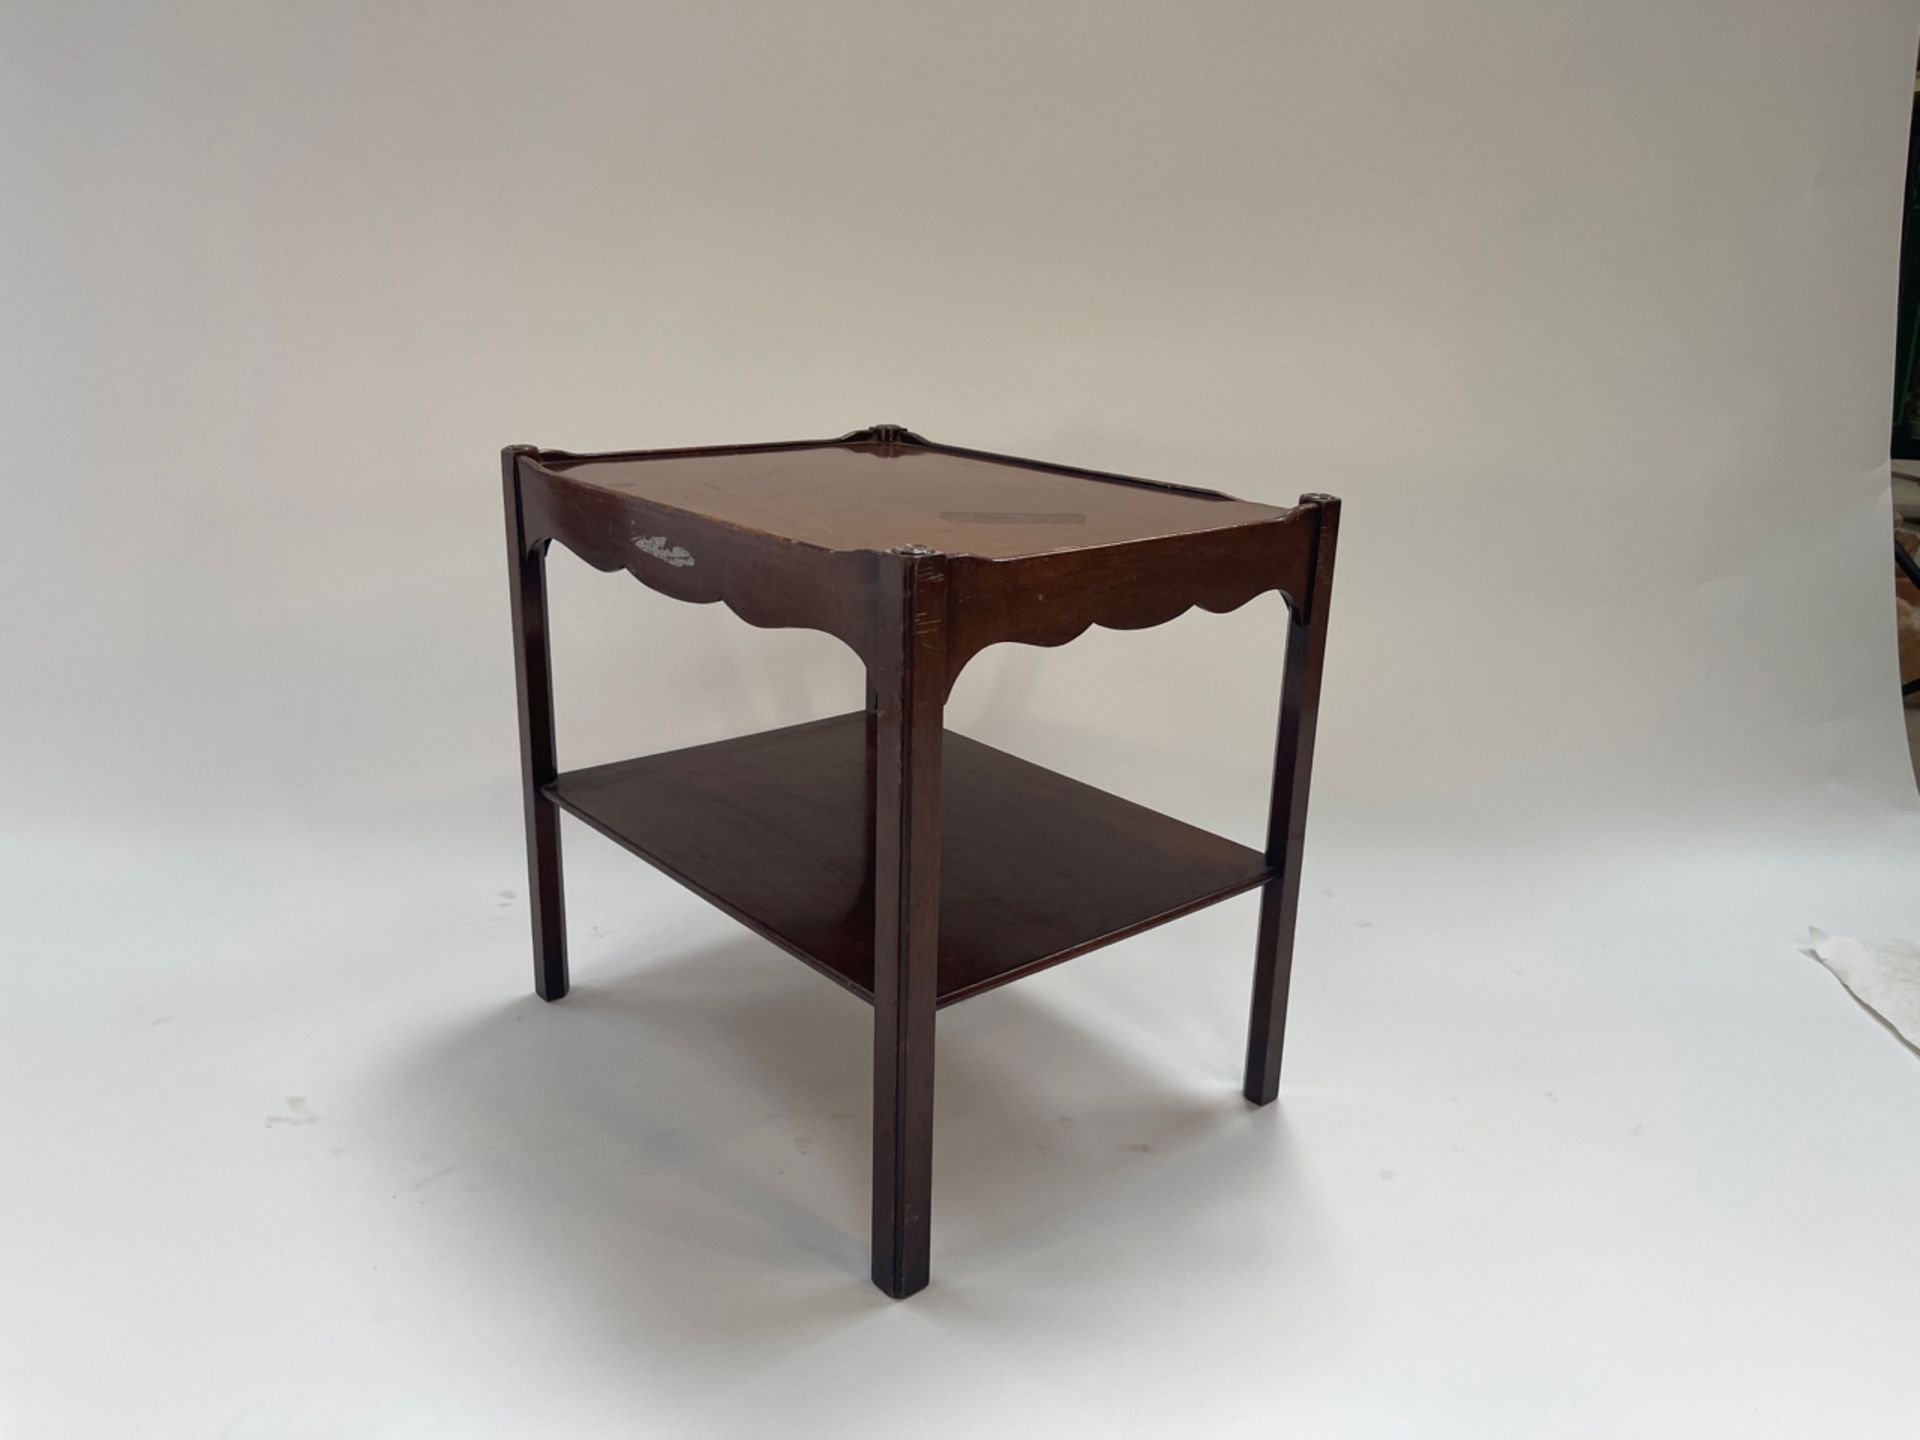 English Side Table in mahogany with shelf - Image 4 of 4